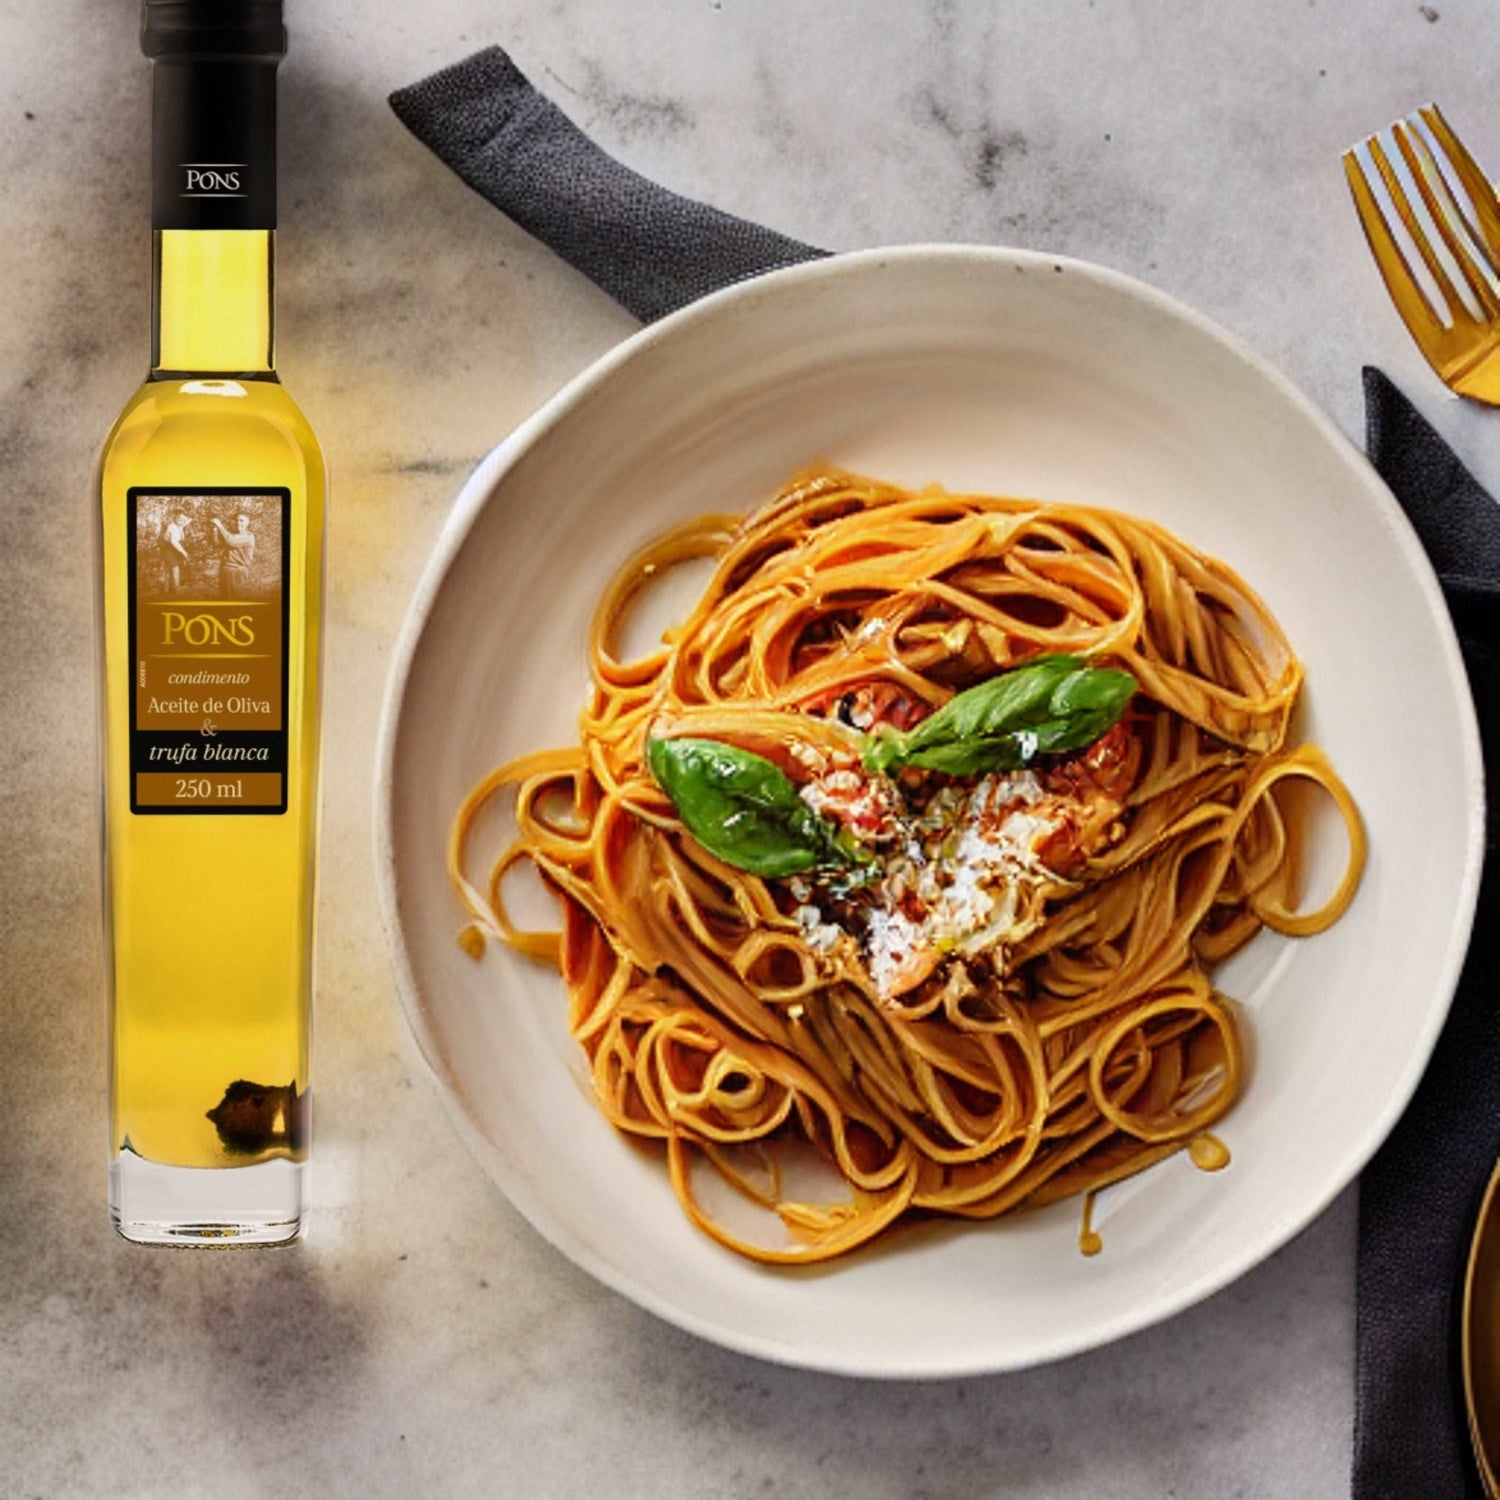 Extra Virgin Olive Oil & White Truffle by Pons